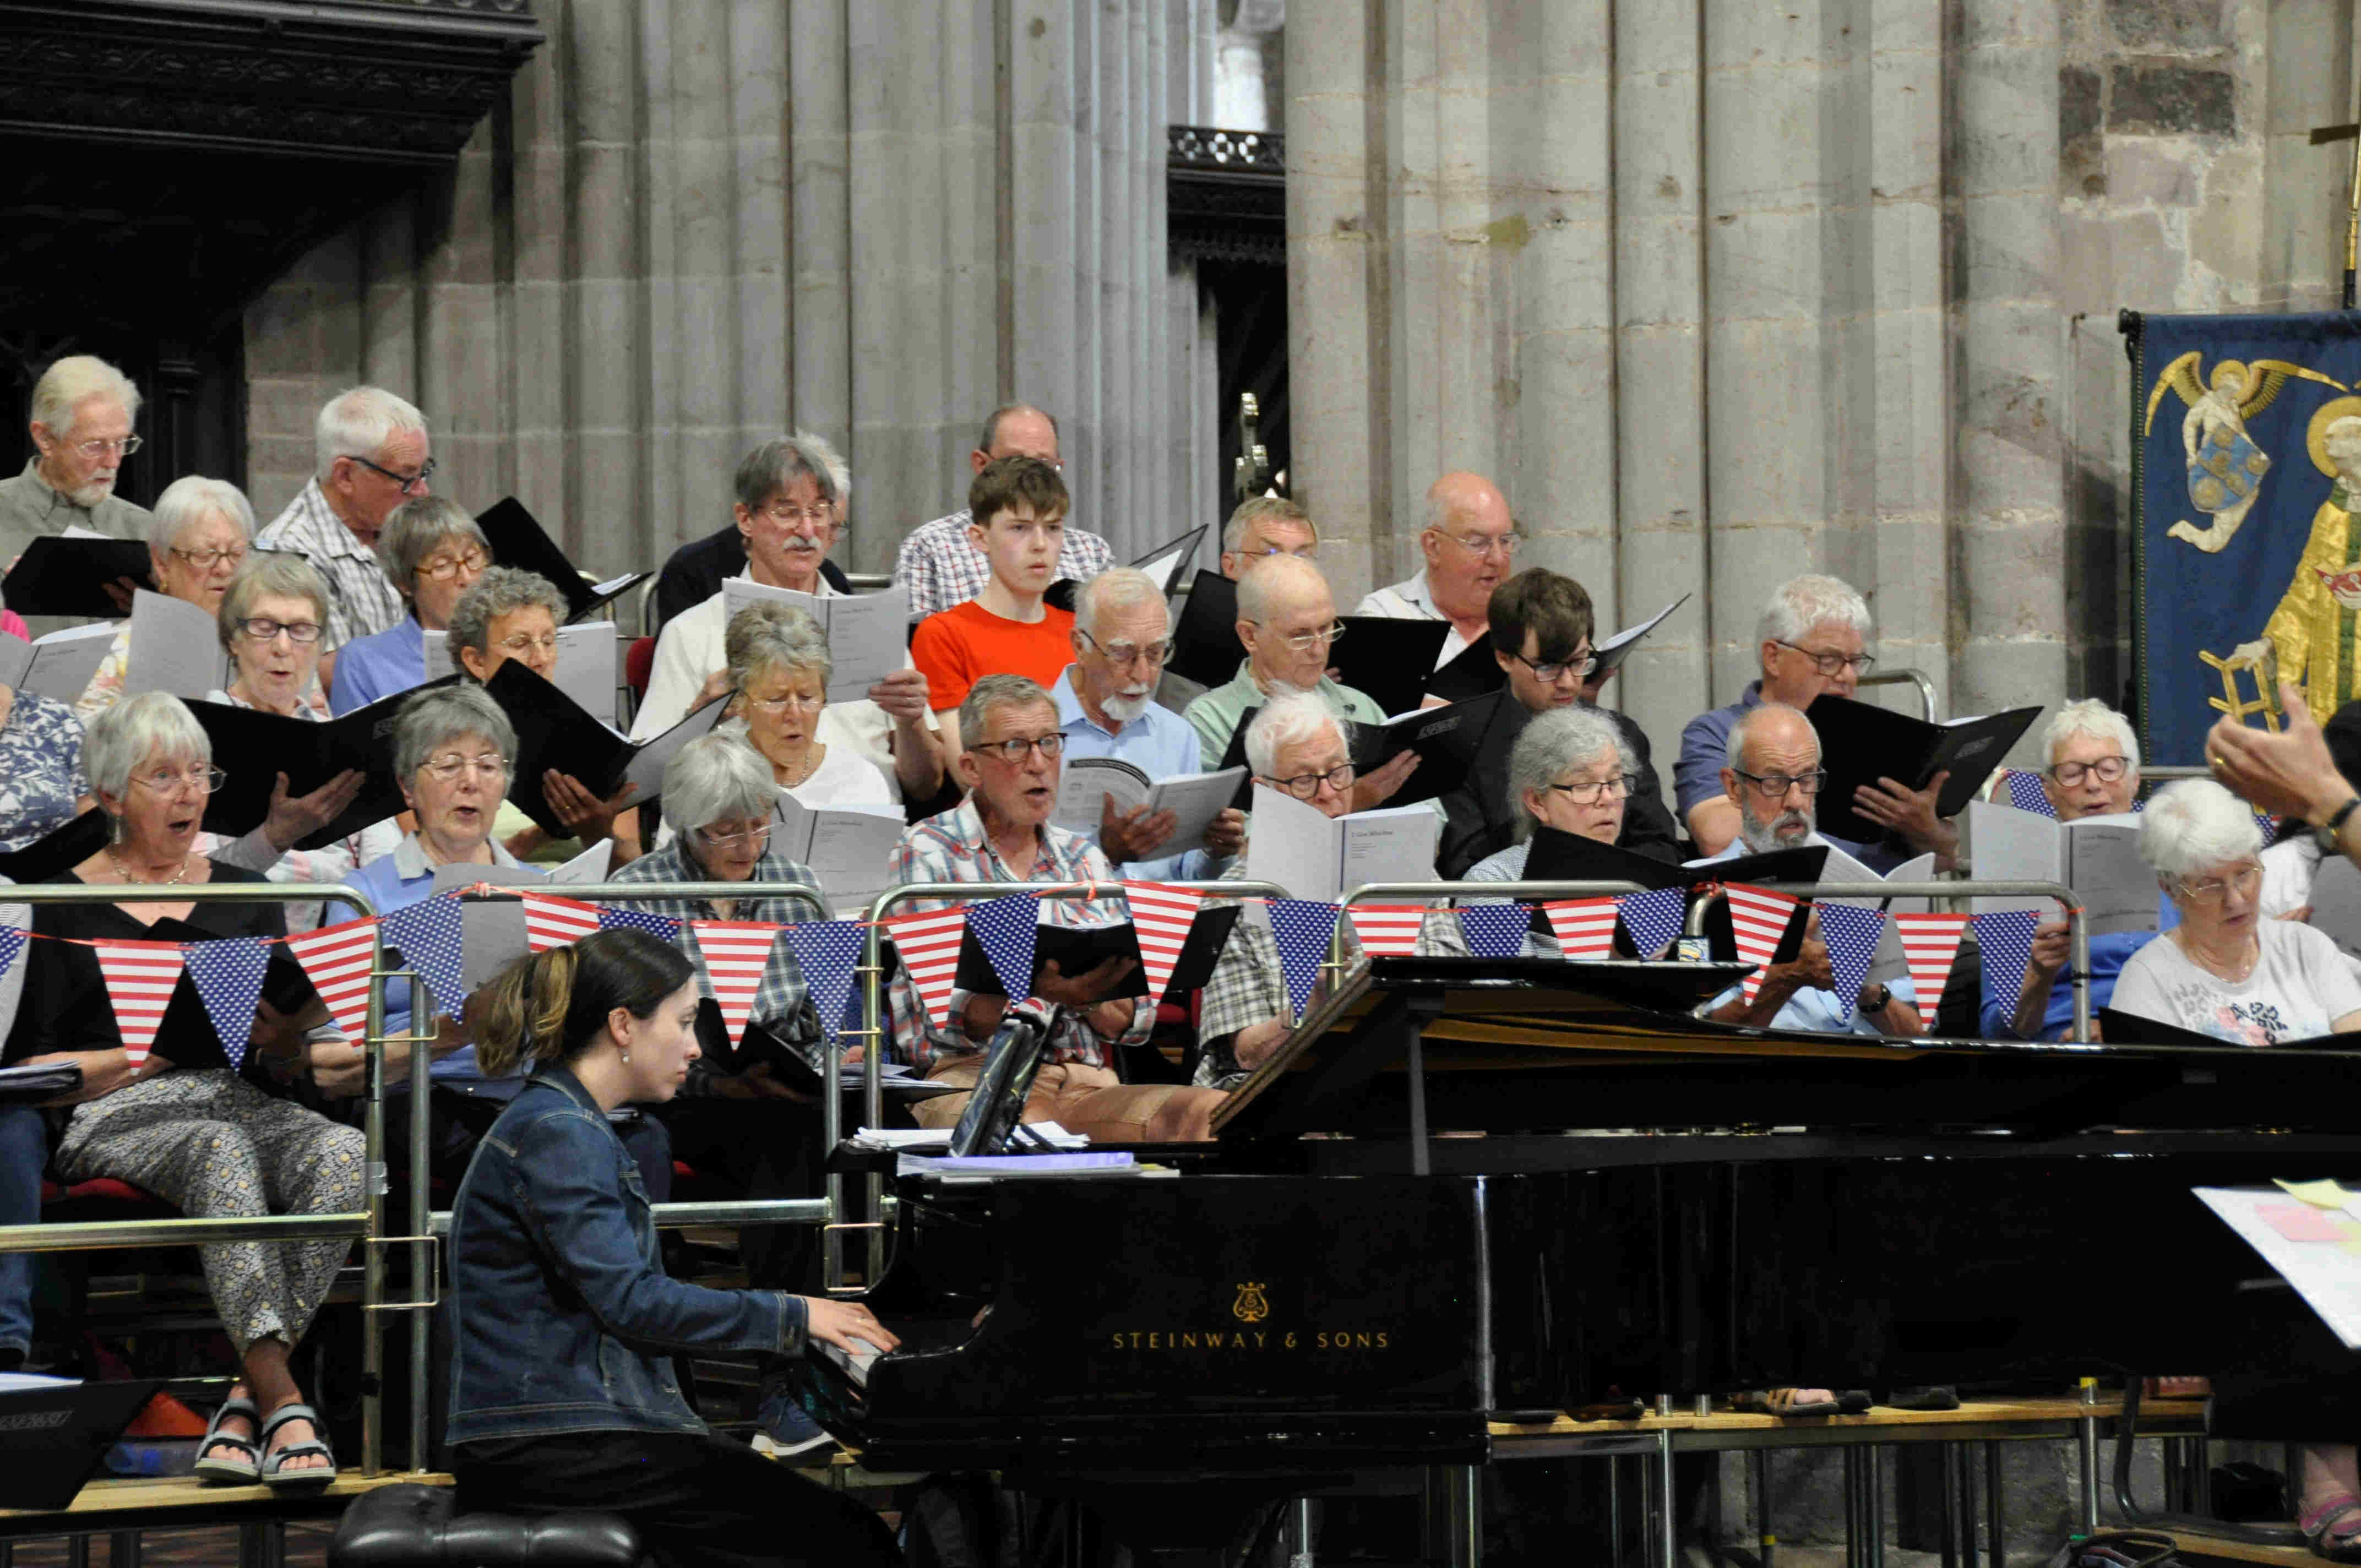 Ludlow Choral Society